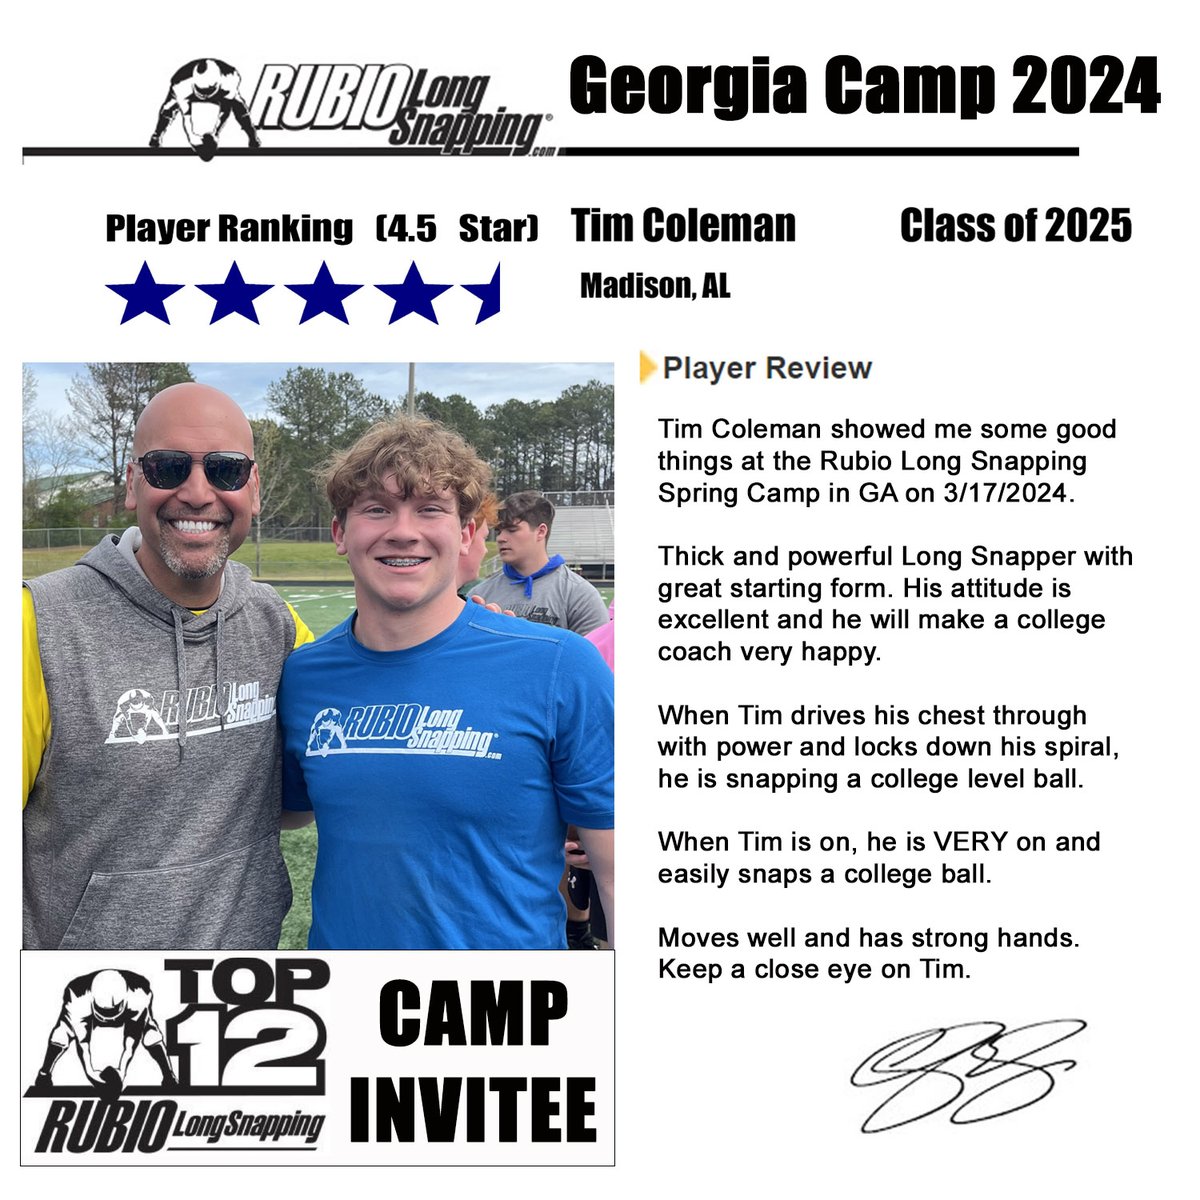 Thank you for the review @TheChrisRubio from the March Georgia Camp. I am looking forward to the Rising Seniors and Top 12 Camps in Lewiston, ID in July. Ready to Compete with the Best LS in the Country! #TheFactory @JCJetsFootball @JCFB_Recruiting @coachripshwtime…